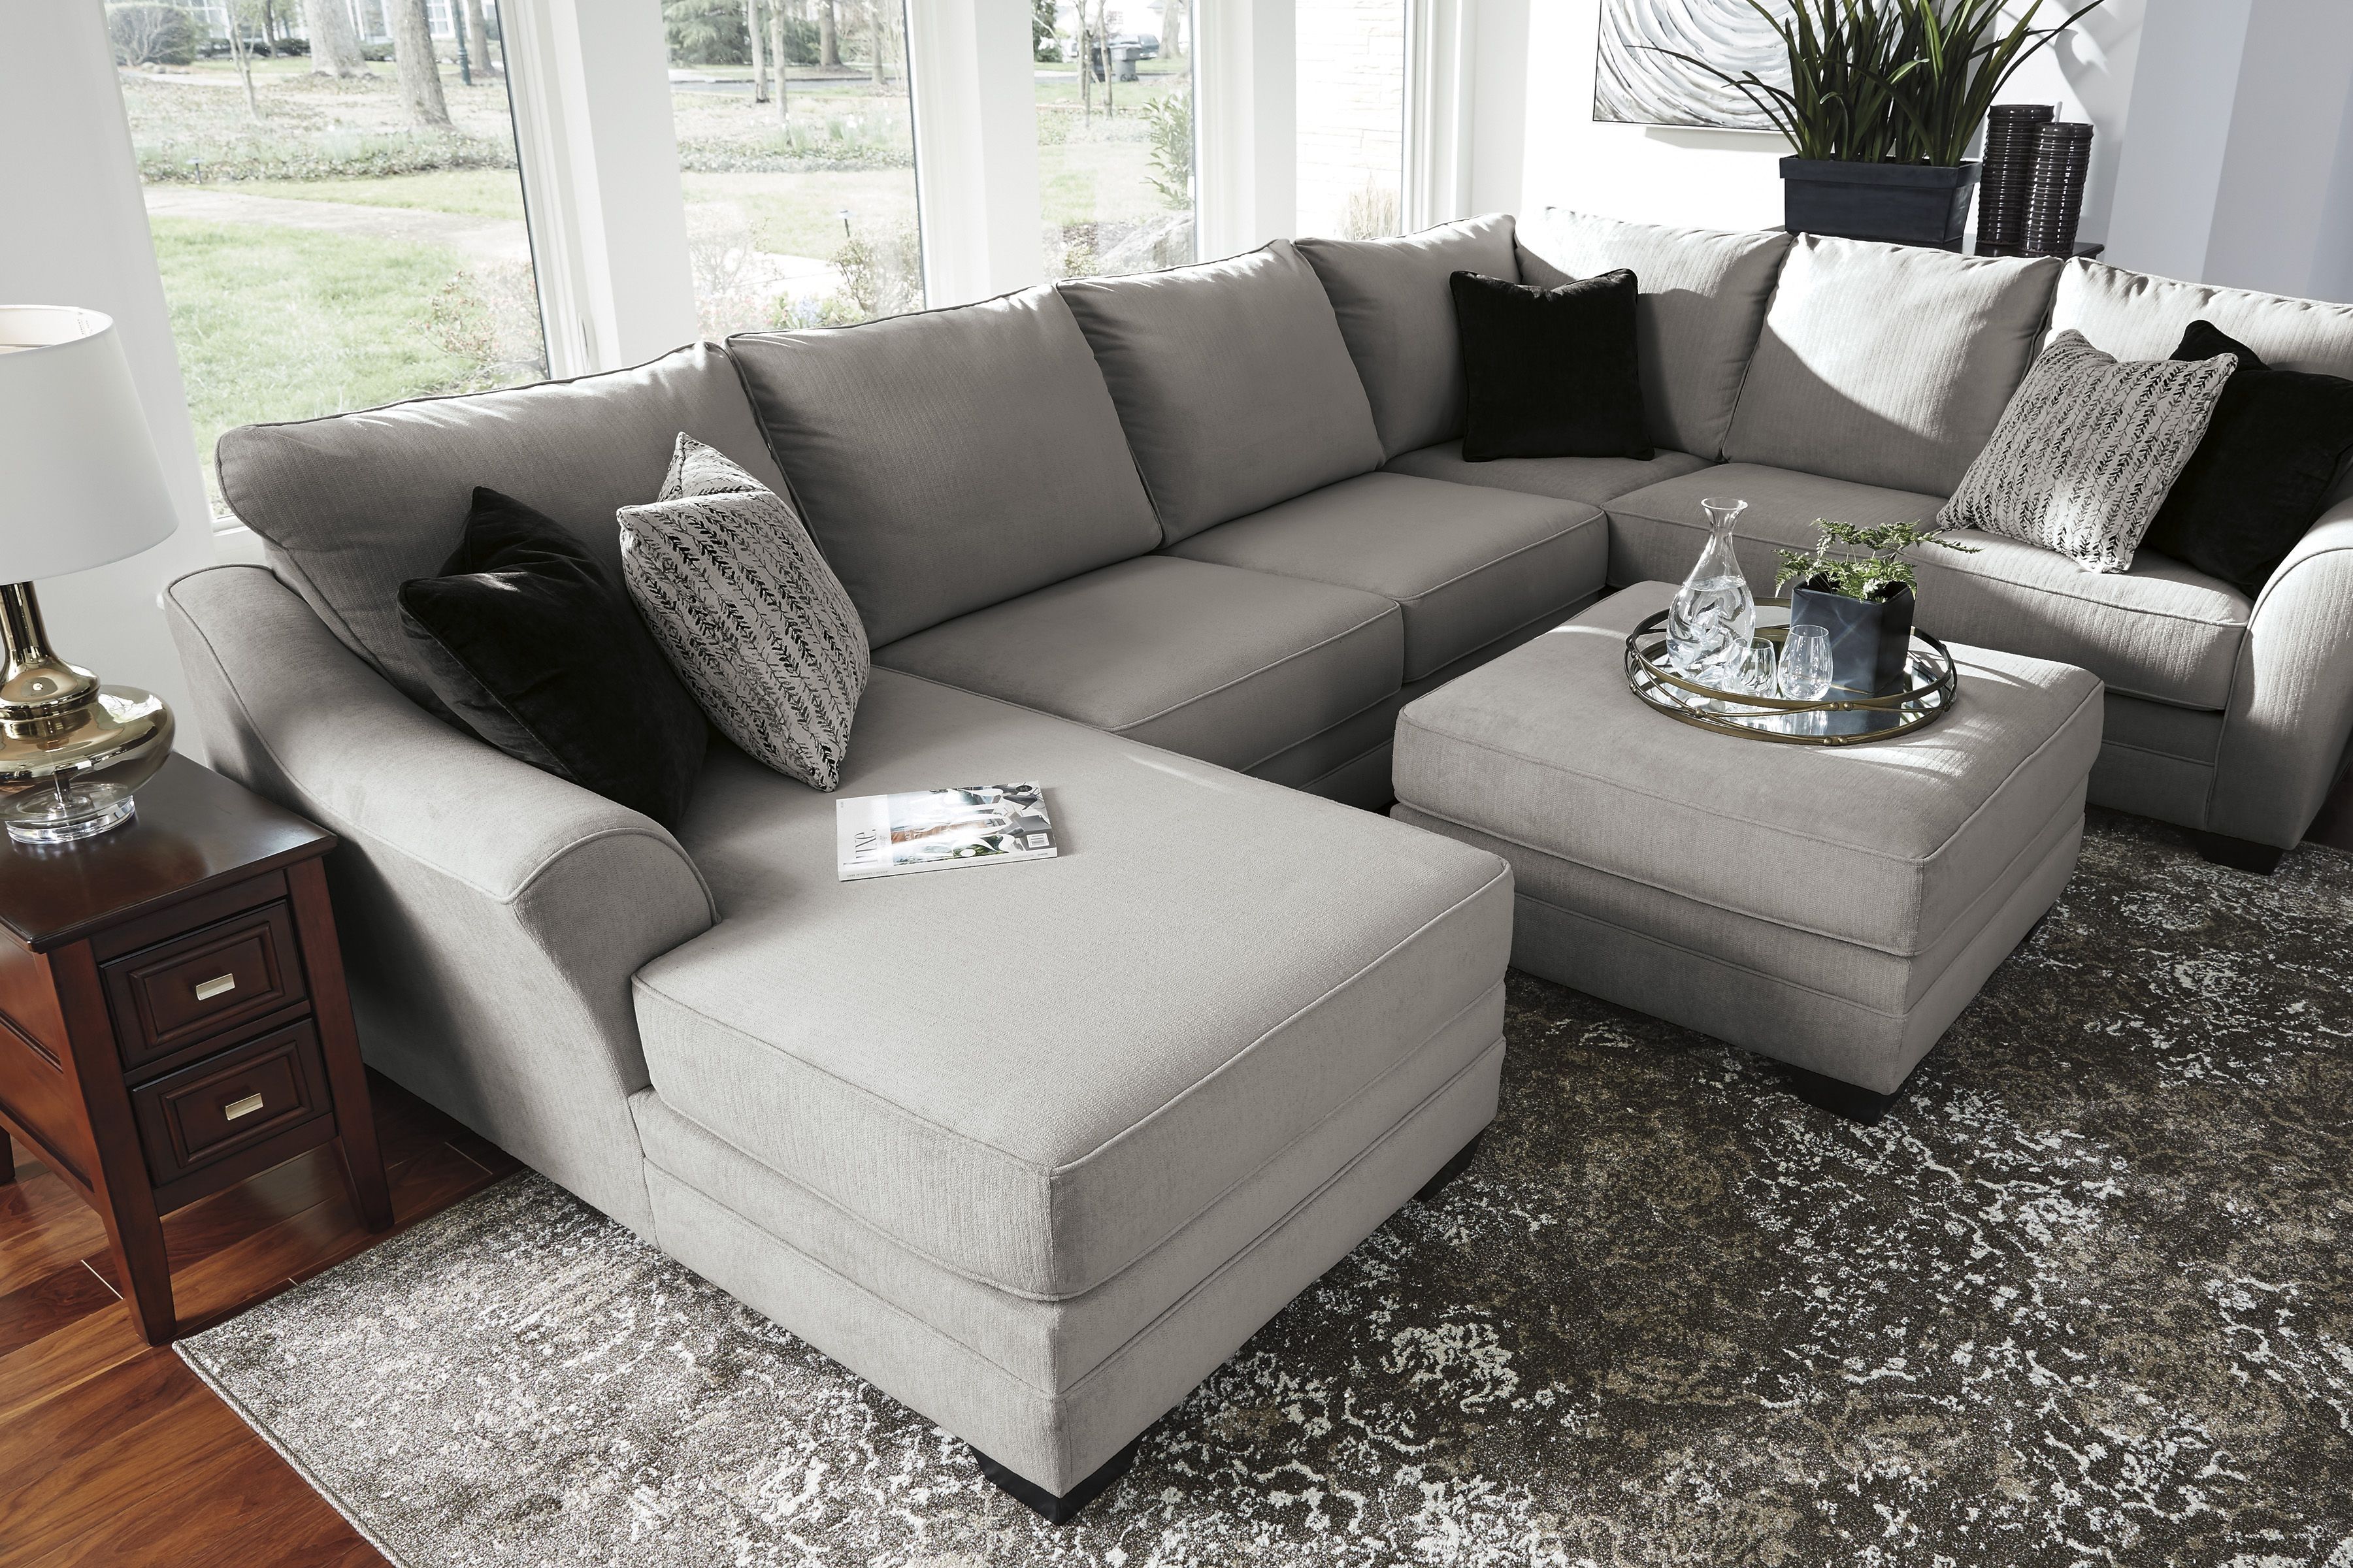 Palempor 3 Piece Laf Sectional In 2018 | Home Is Where The Heart Is Pertaining To Norfolk Chocolate 3 Piece Sectionals With Laf Chaise (View 21 of 30)